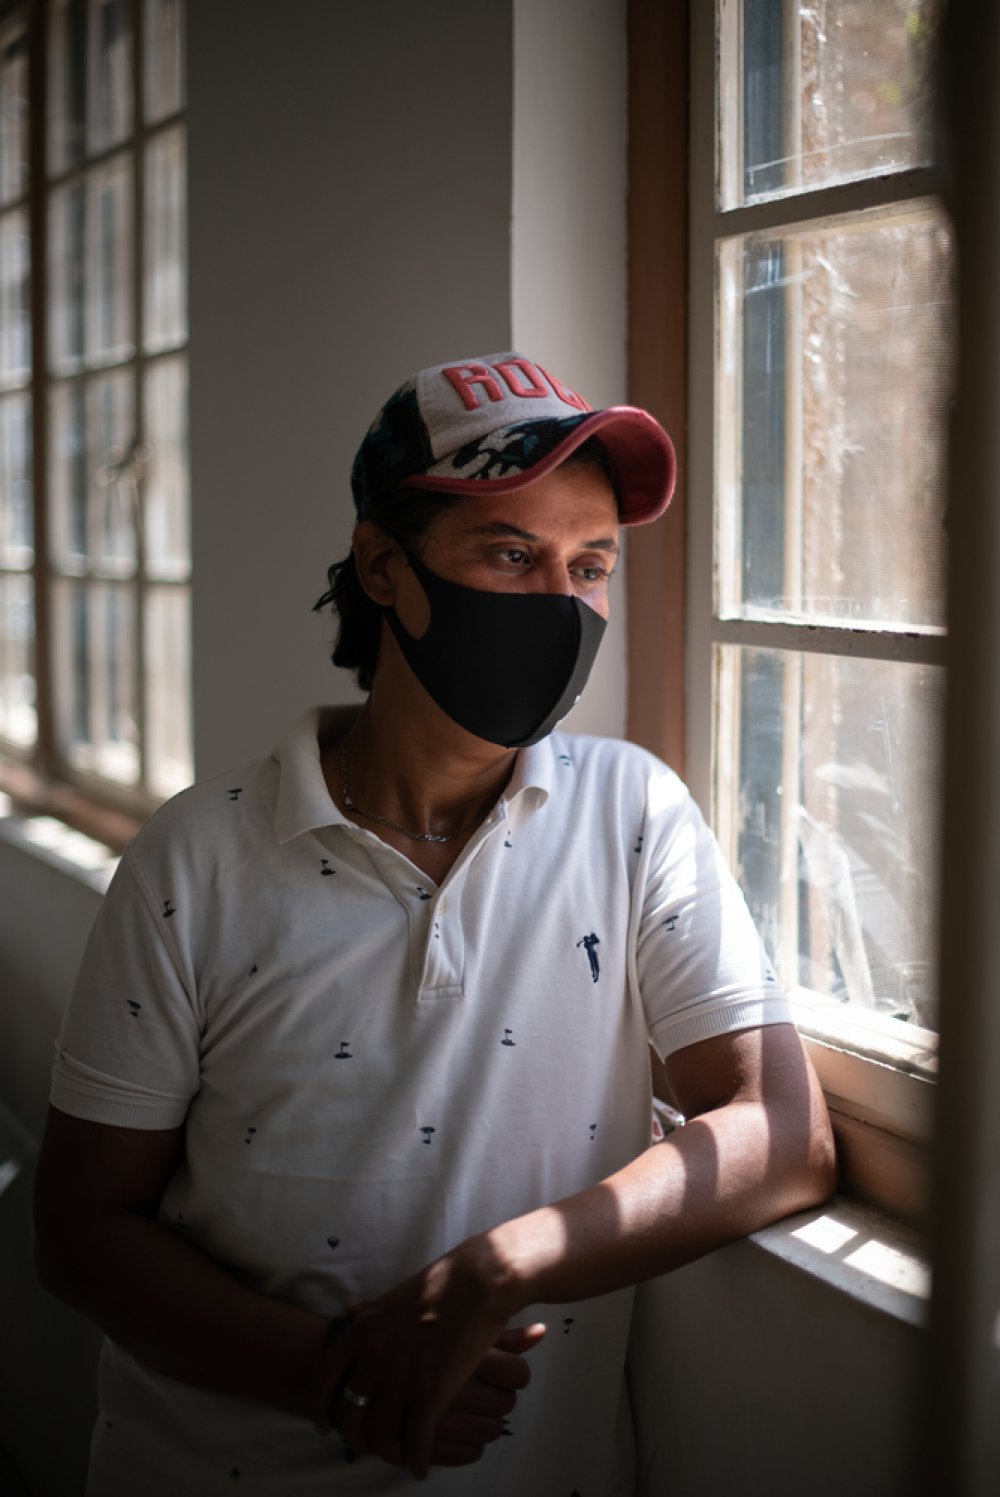 Rawabi, 37, is a patient being treated at the National Tuberculosis Institute. After being diagnosed with MDR-TB in 2019, she has been taking the new oral treatment since 2019, and is now considered as non contagious and is on her way to remission.